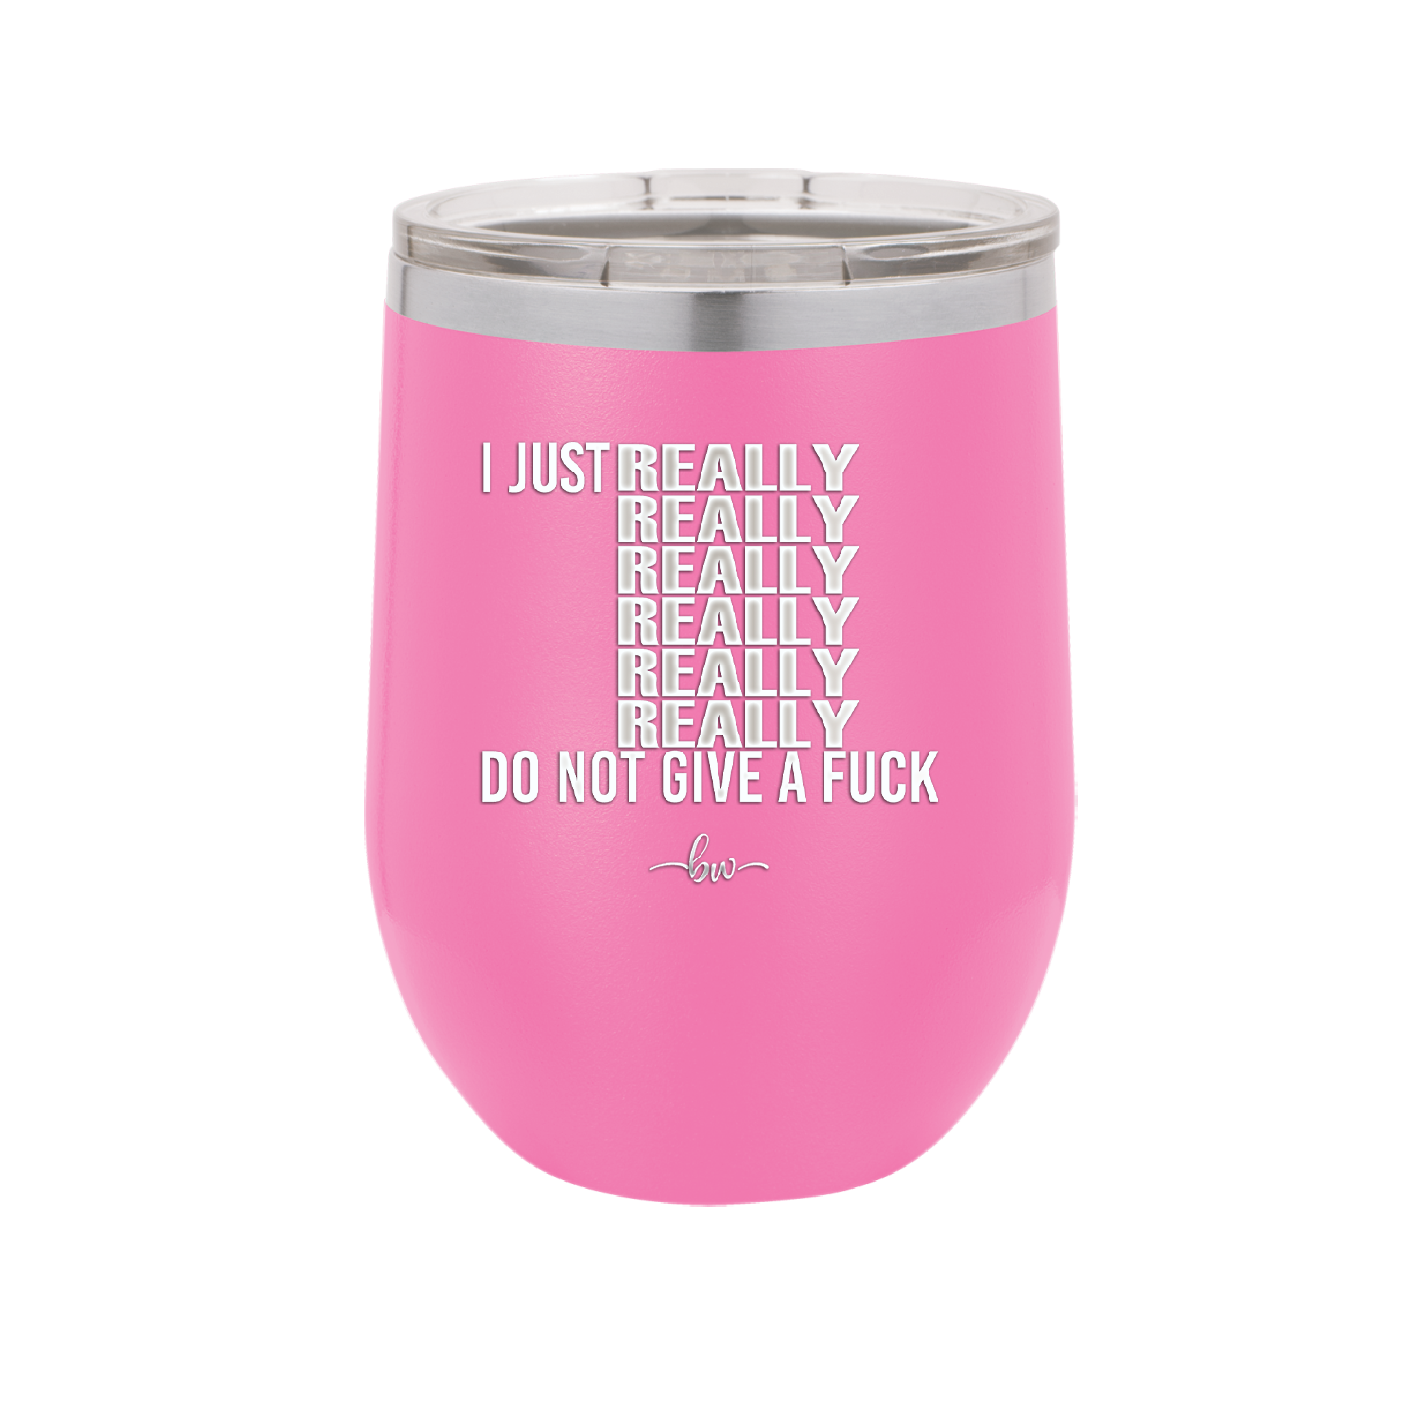 I Just Really Really Really Really Really Really Do Not Give a Fuck - Laser Engraved Stainless Steel Drinkware - 2290 -